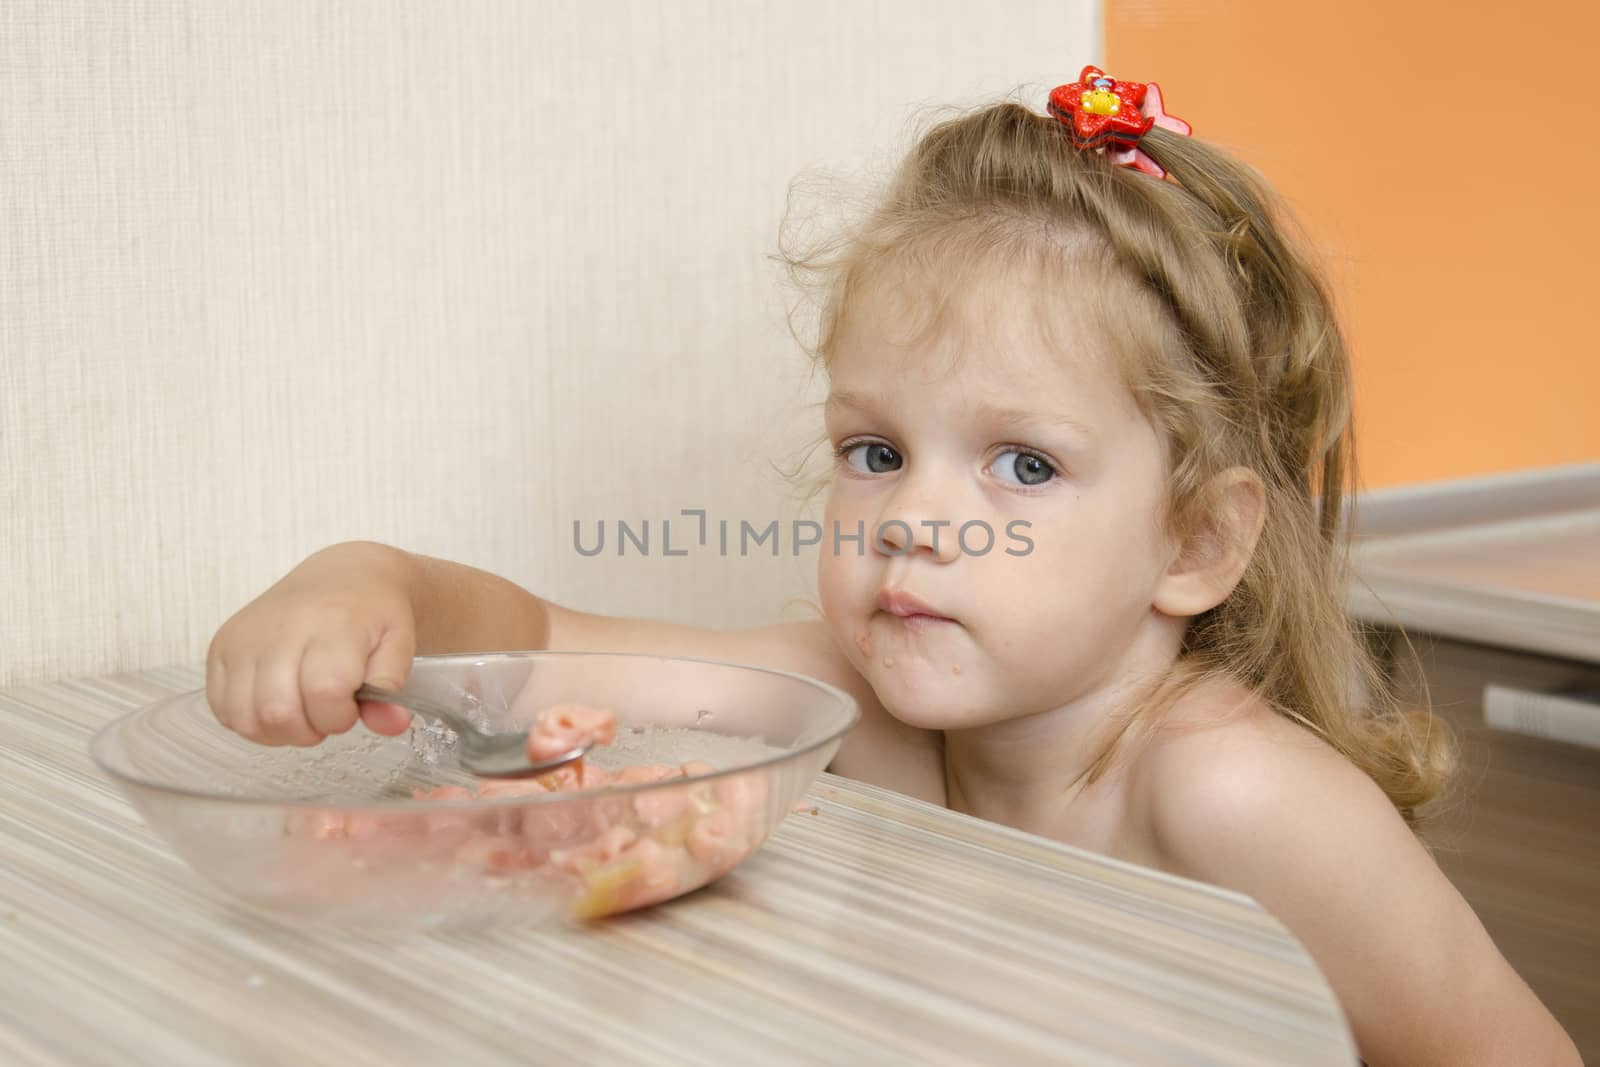 The child sits in the kitchen and eats porridge at the table. The child is distracted and with views of the inquiring looks into the frame.